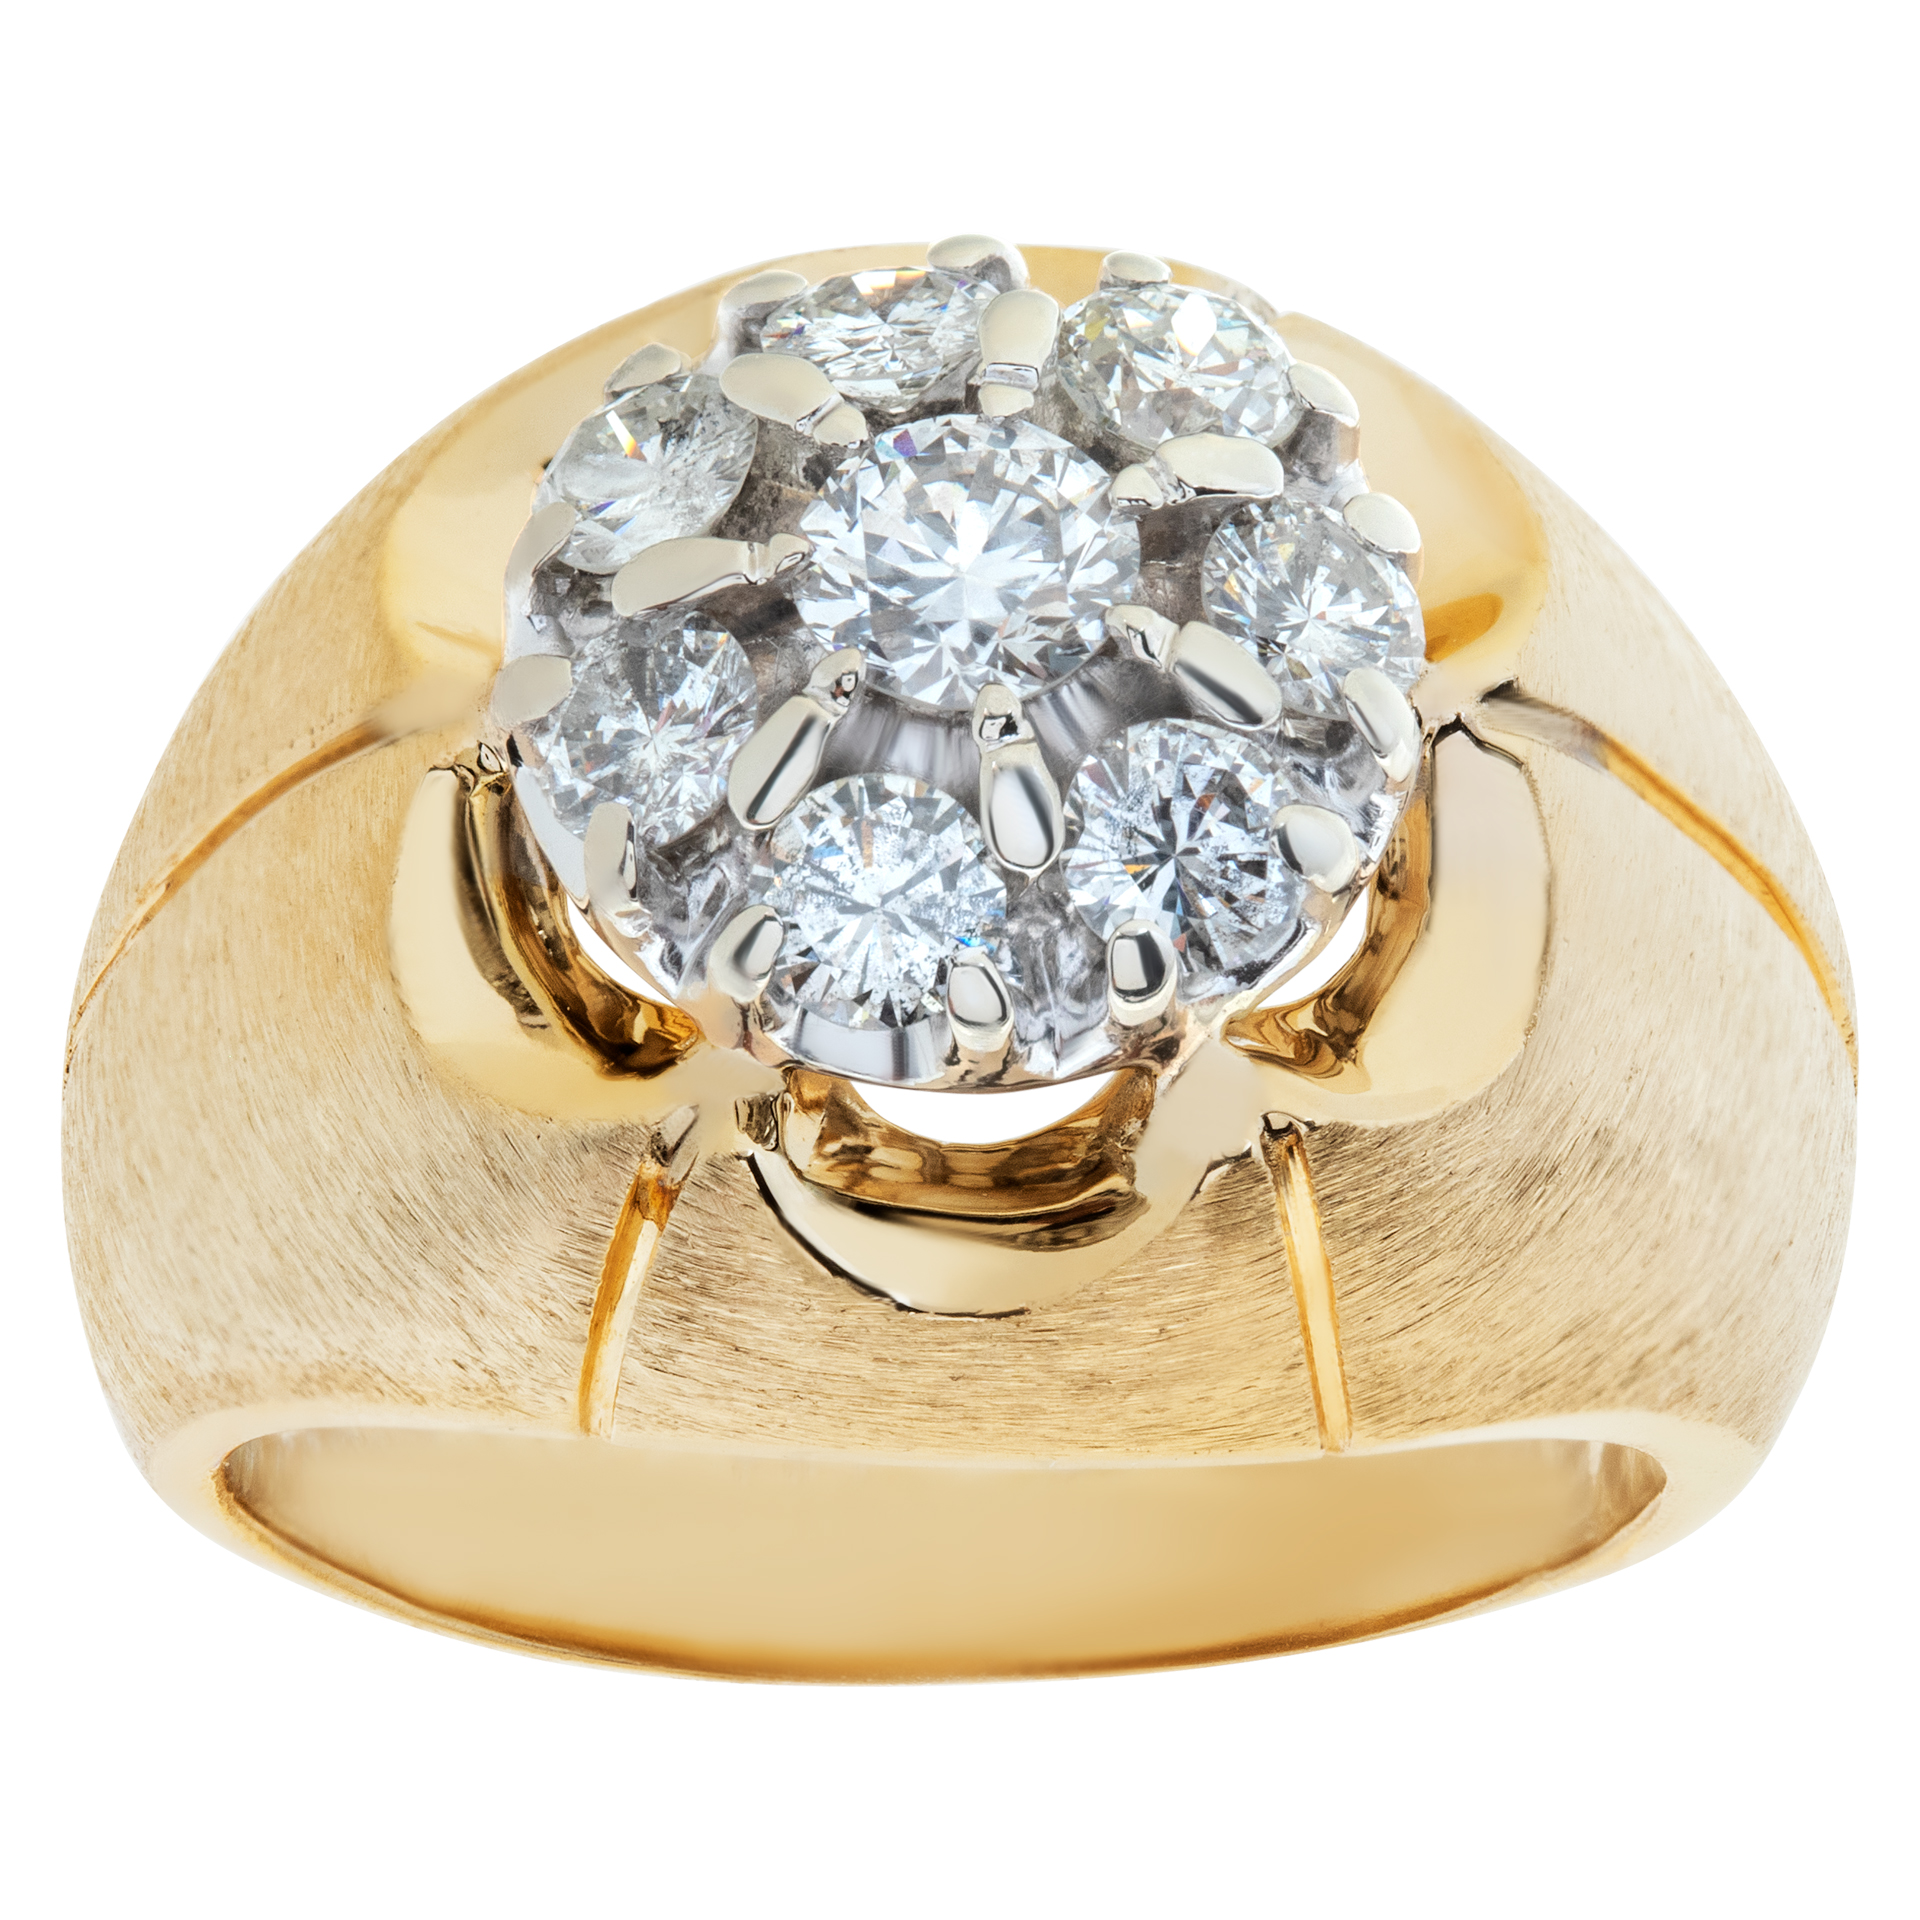 Attractive diamond ring in 14k yellow gold. 1.00 carats in diamonds. Size 8